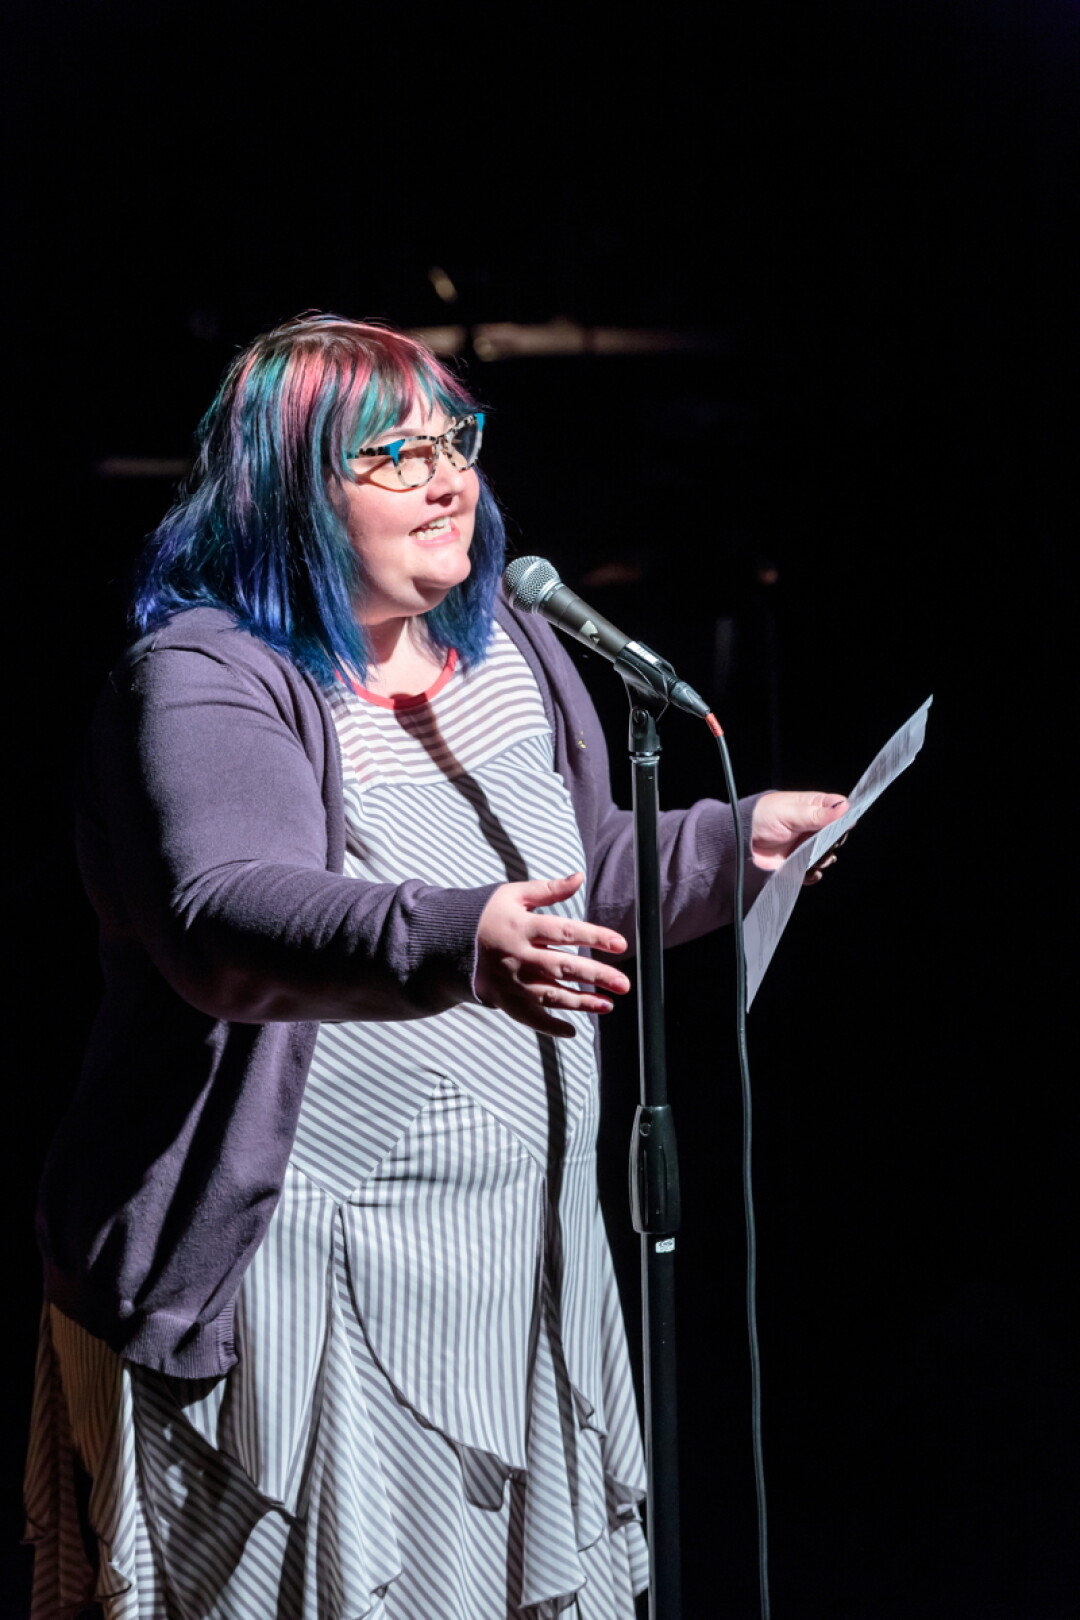 SPOKEN NERD. Strike Theater co-founder and ComCon co-organizer Allison Broeren grew up in Eau Claire. ComCon is a winter retreat/workshopping weekend for comedy writers and performers coming up in February on Lake Holcombe.